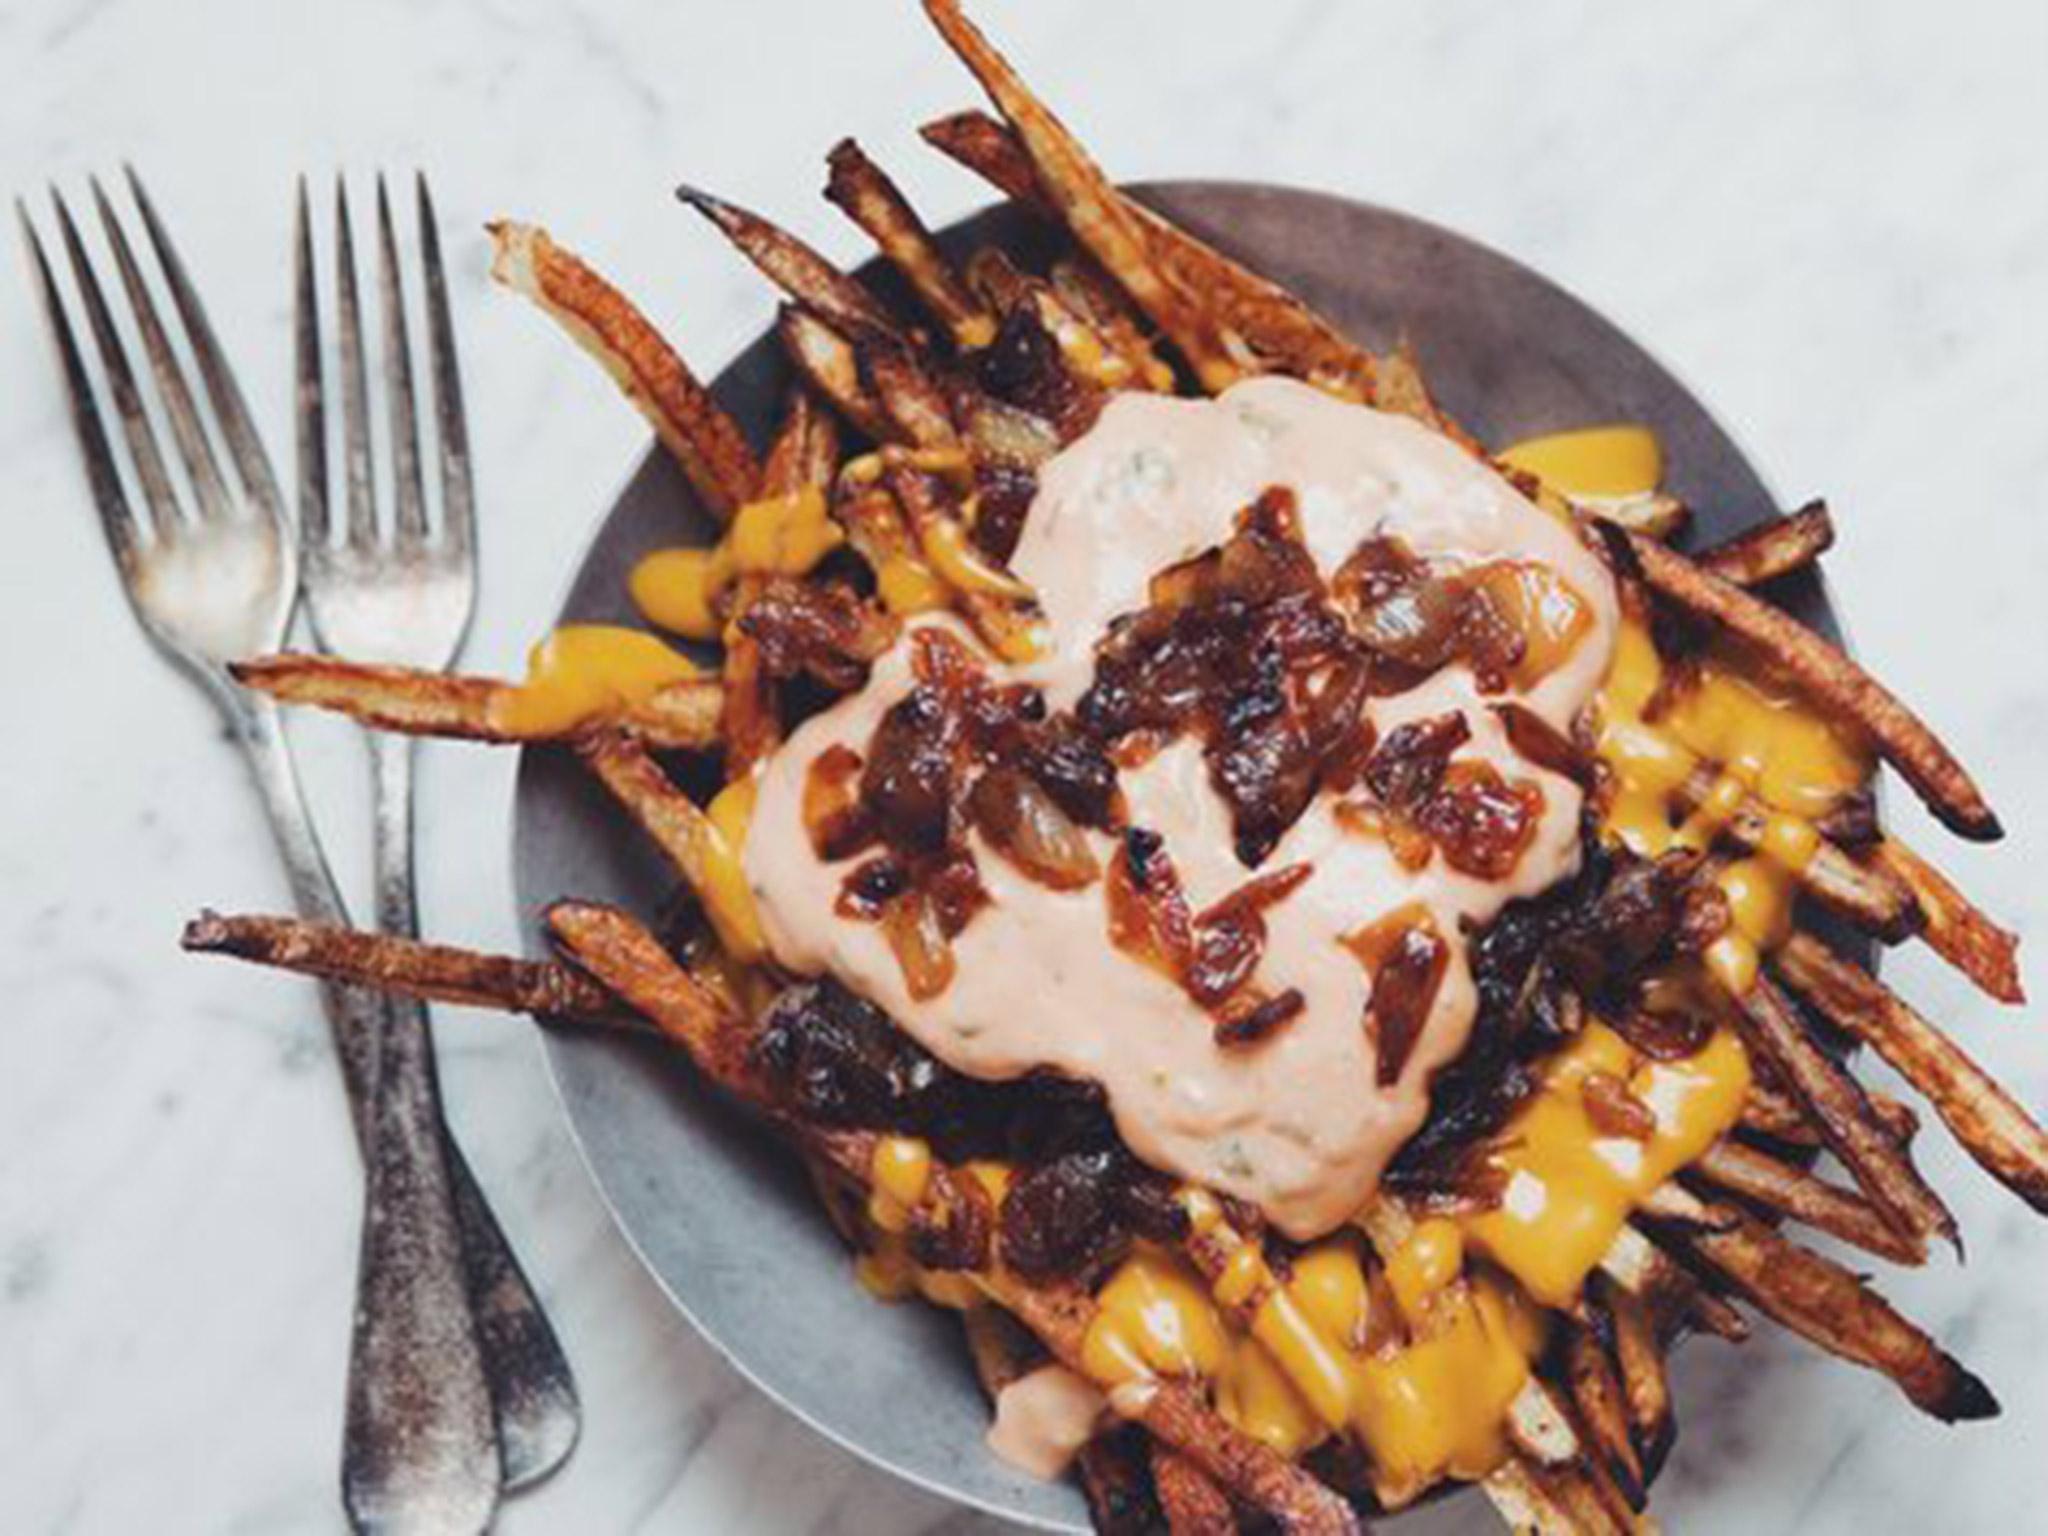 Animal-style fries by Youtubers hot for food